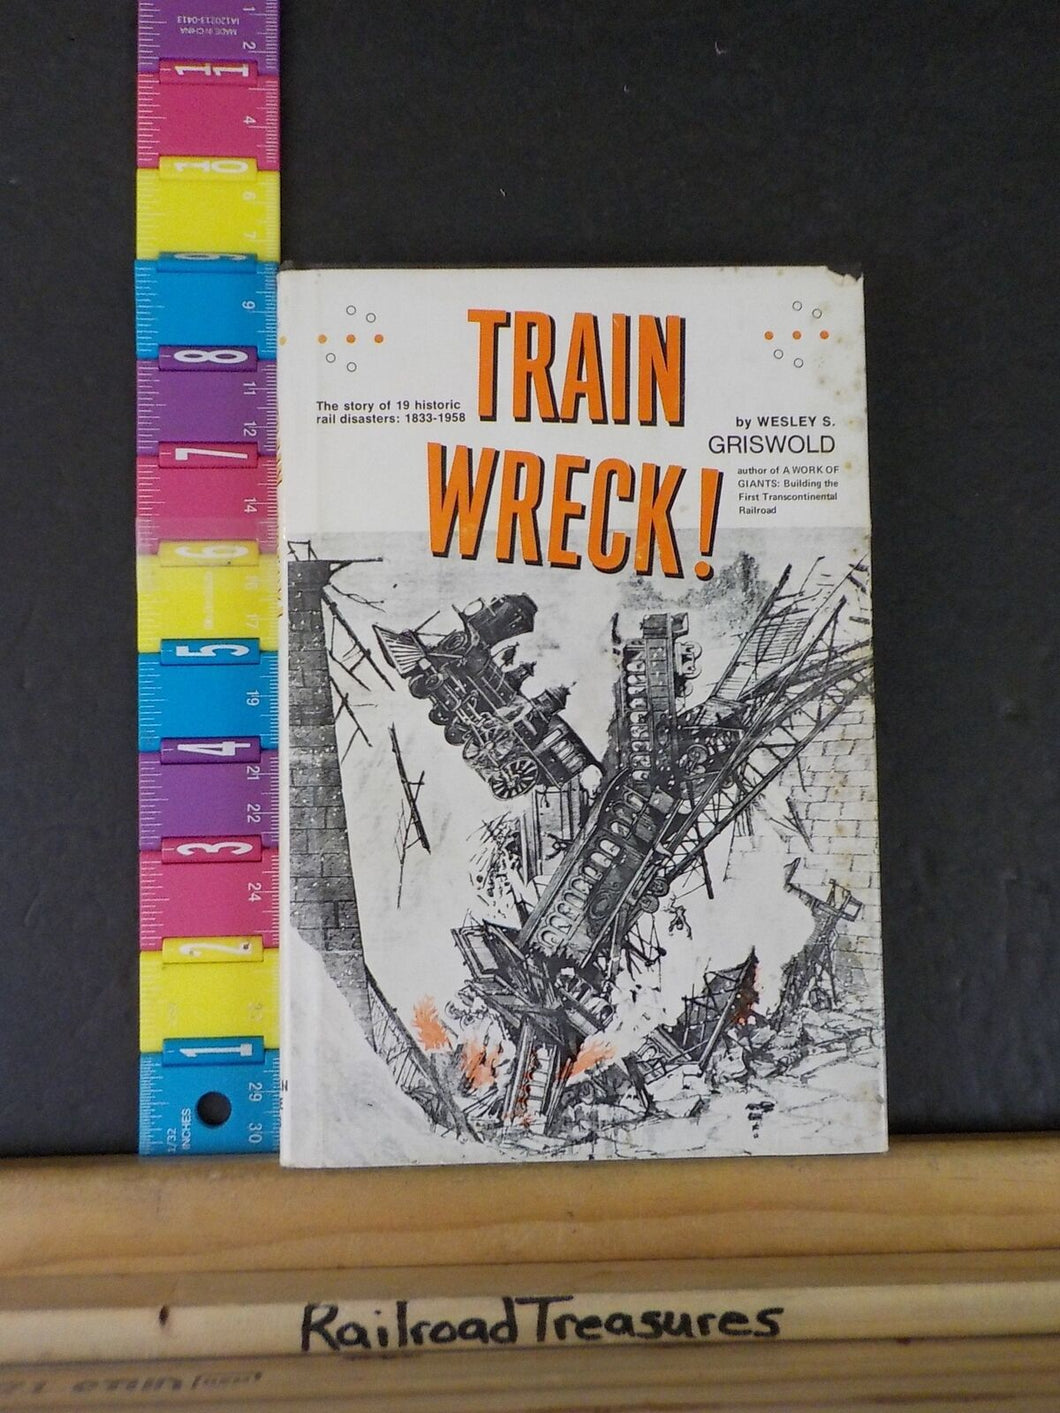 Train Wreck! Story 19 historic rail disasters 1833-1958  by Griswold